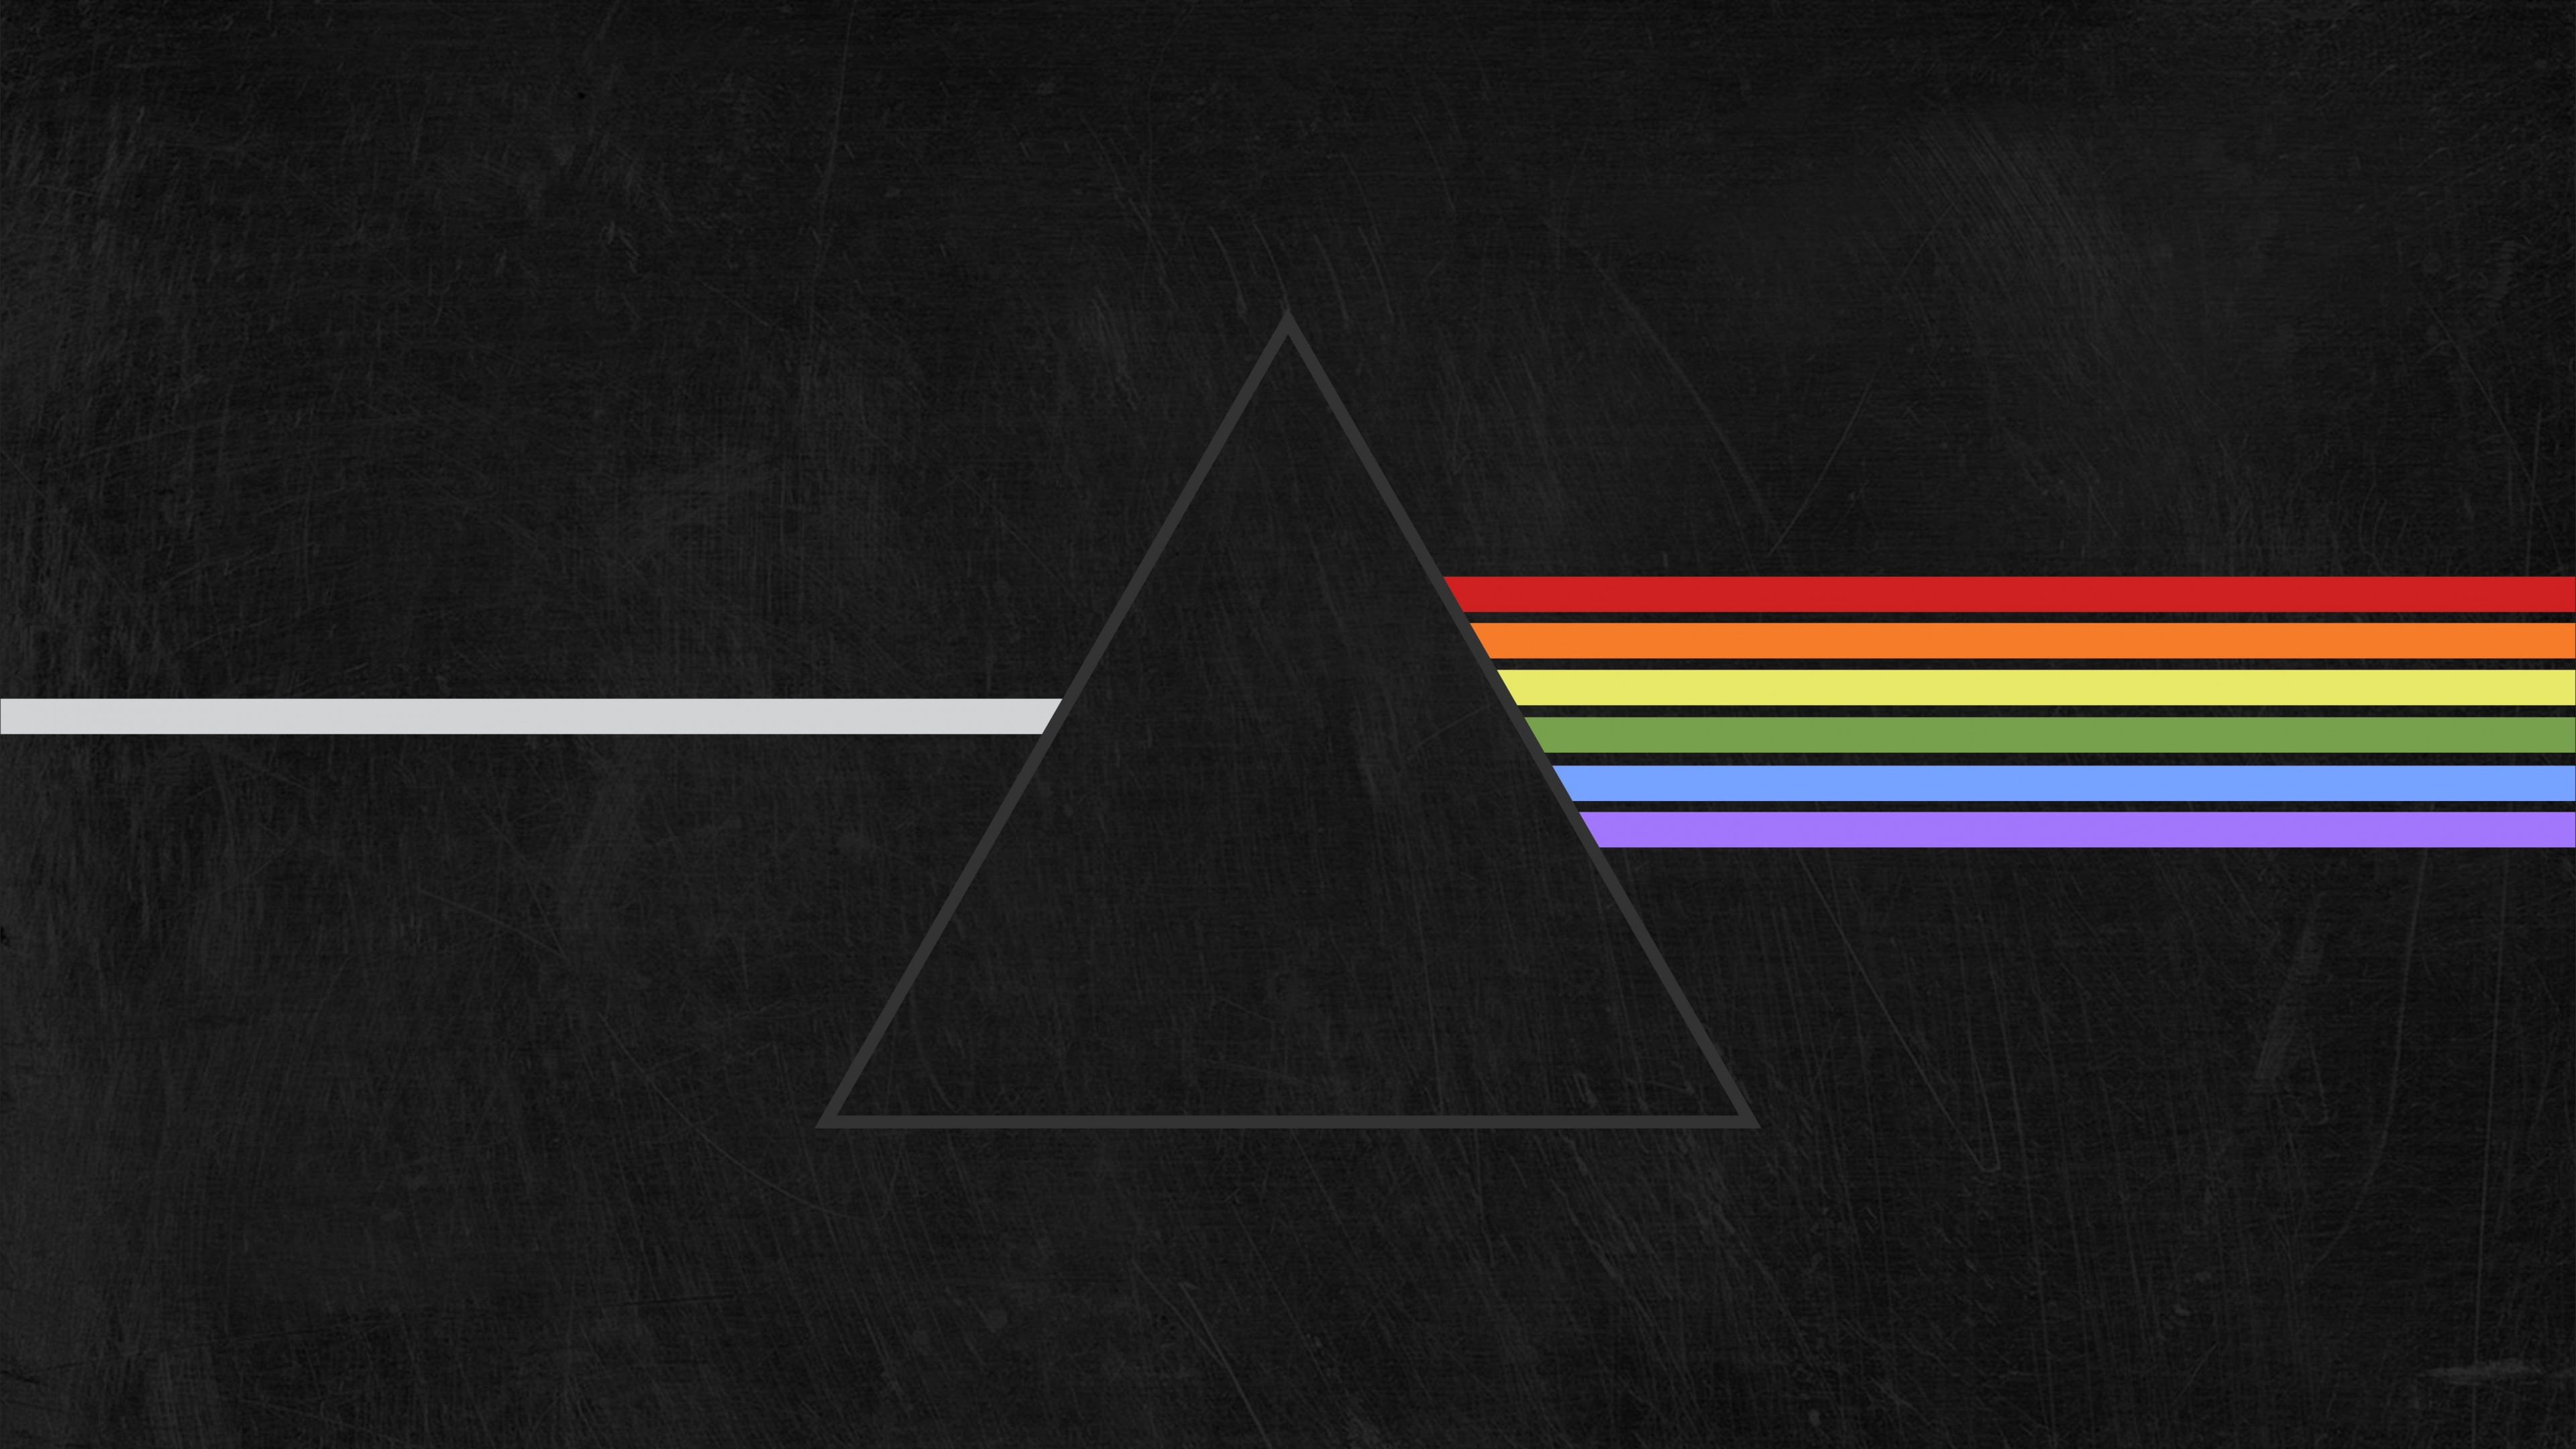 The Dark Side of The Moon, Pink Floyd, Prism, Black, Line. Wallpaper in 3840x2160 Resolution